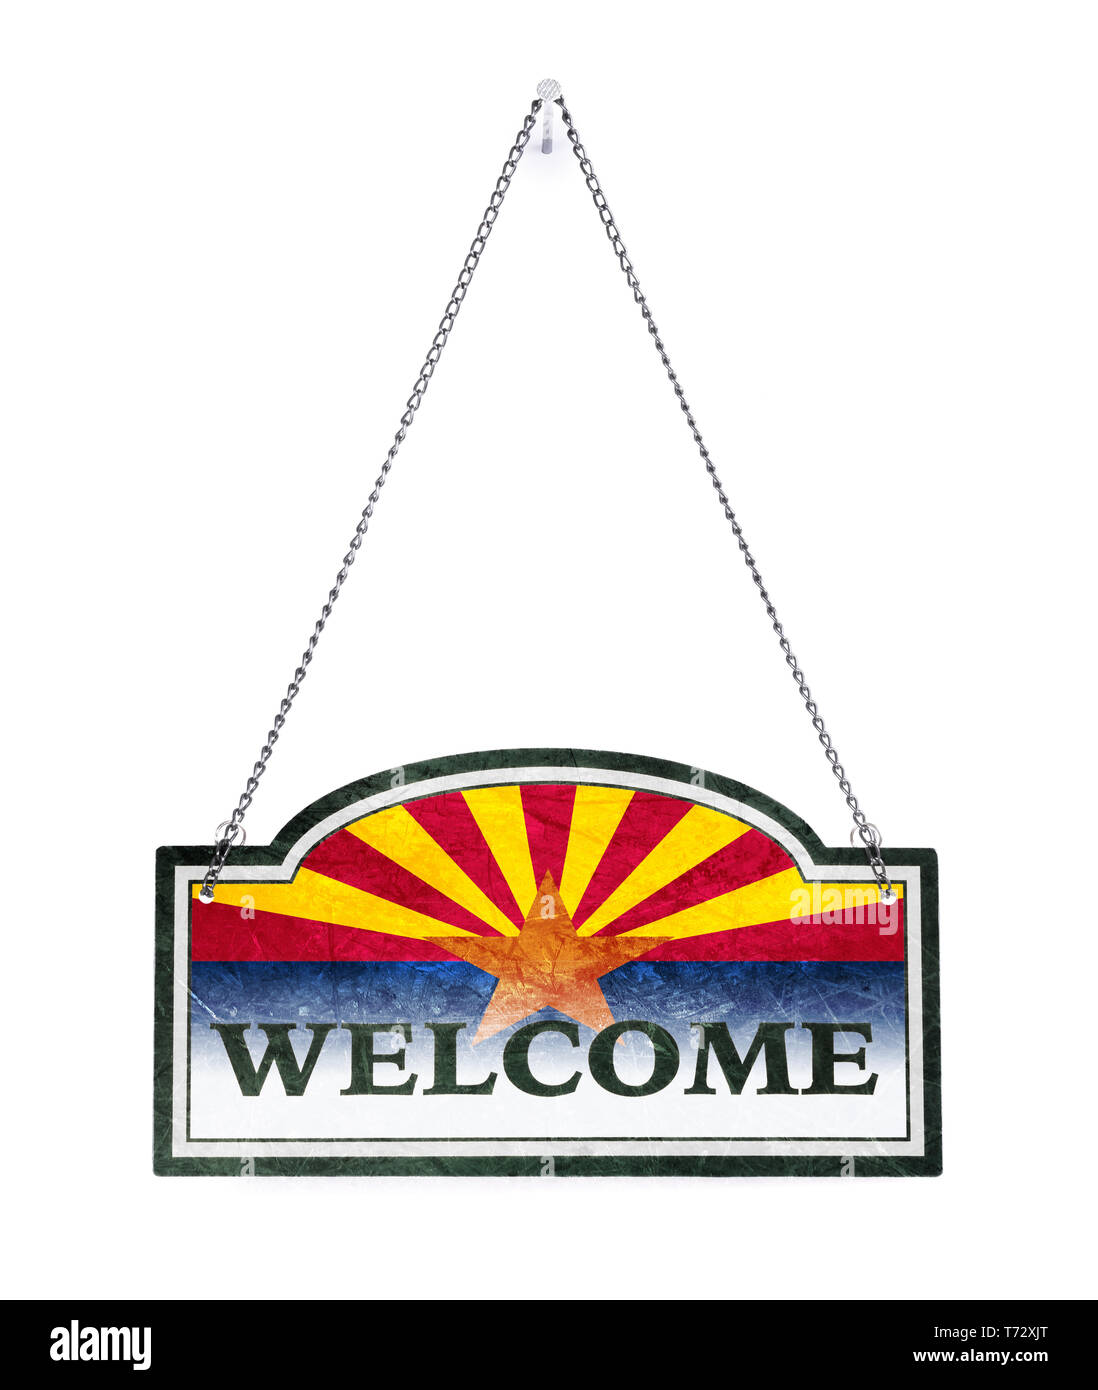 Arizona welcomes you! Old metal sign isolated on white Stock Photo